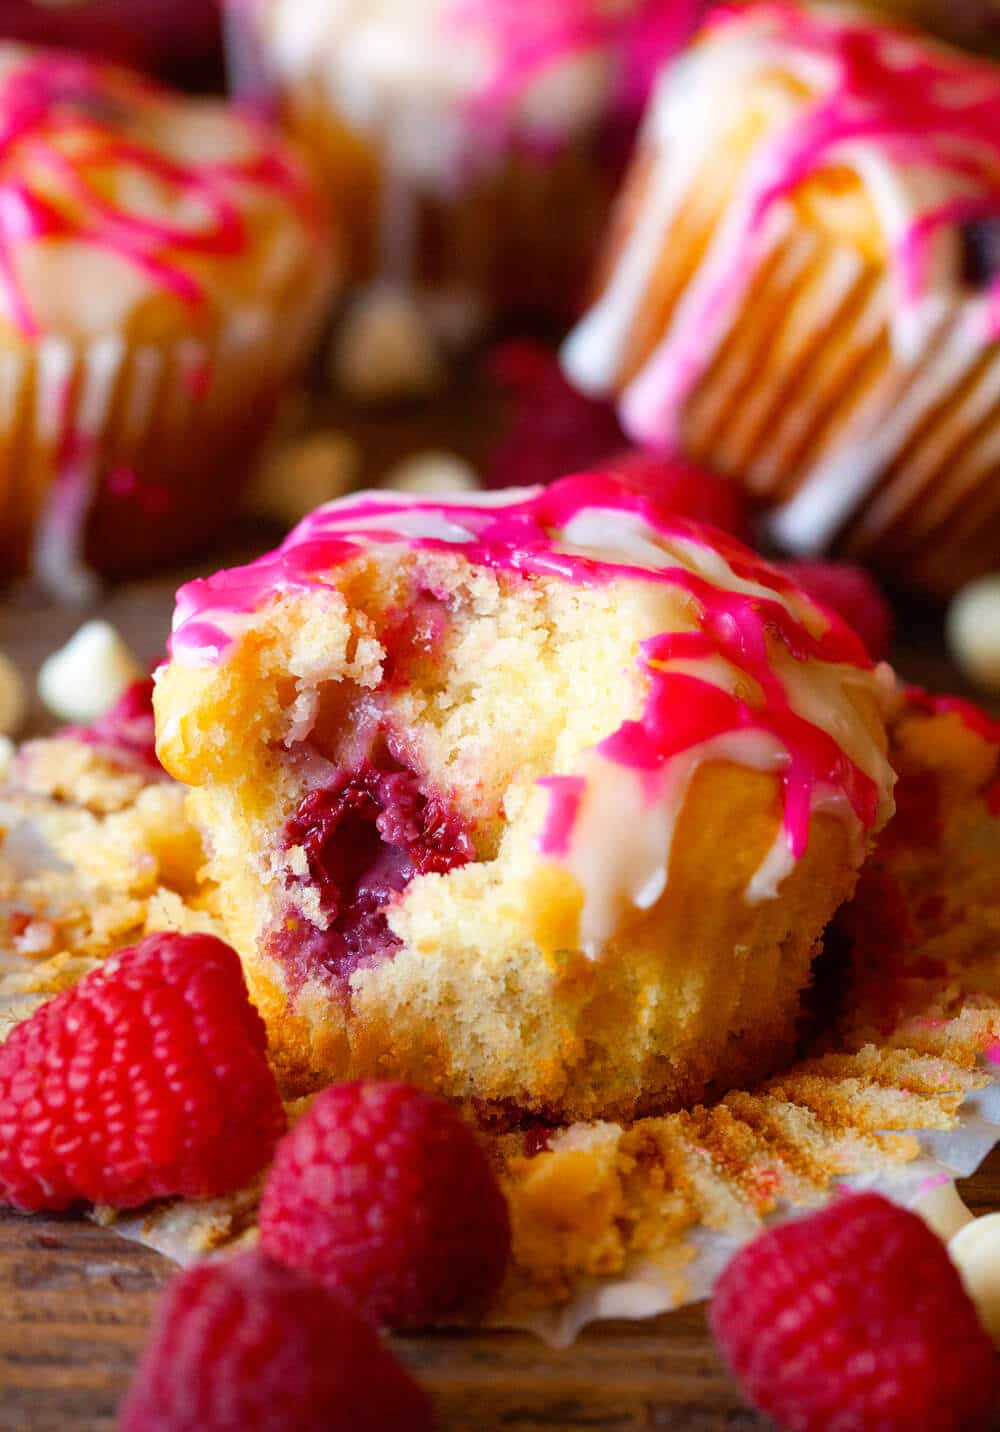 Raspberry Muffin with glaze that is sitting on it's muffin liner after being unwrapped and a bite taken out of it. Fresh raspberries and white chocolate chips next to muffin on wooden background.